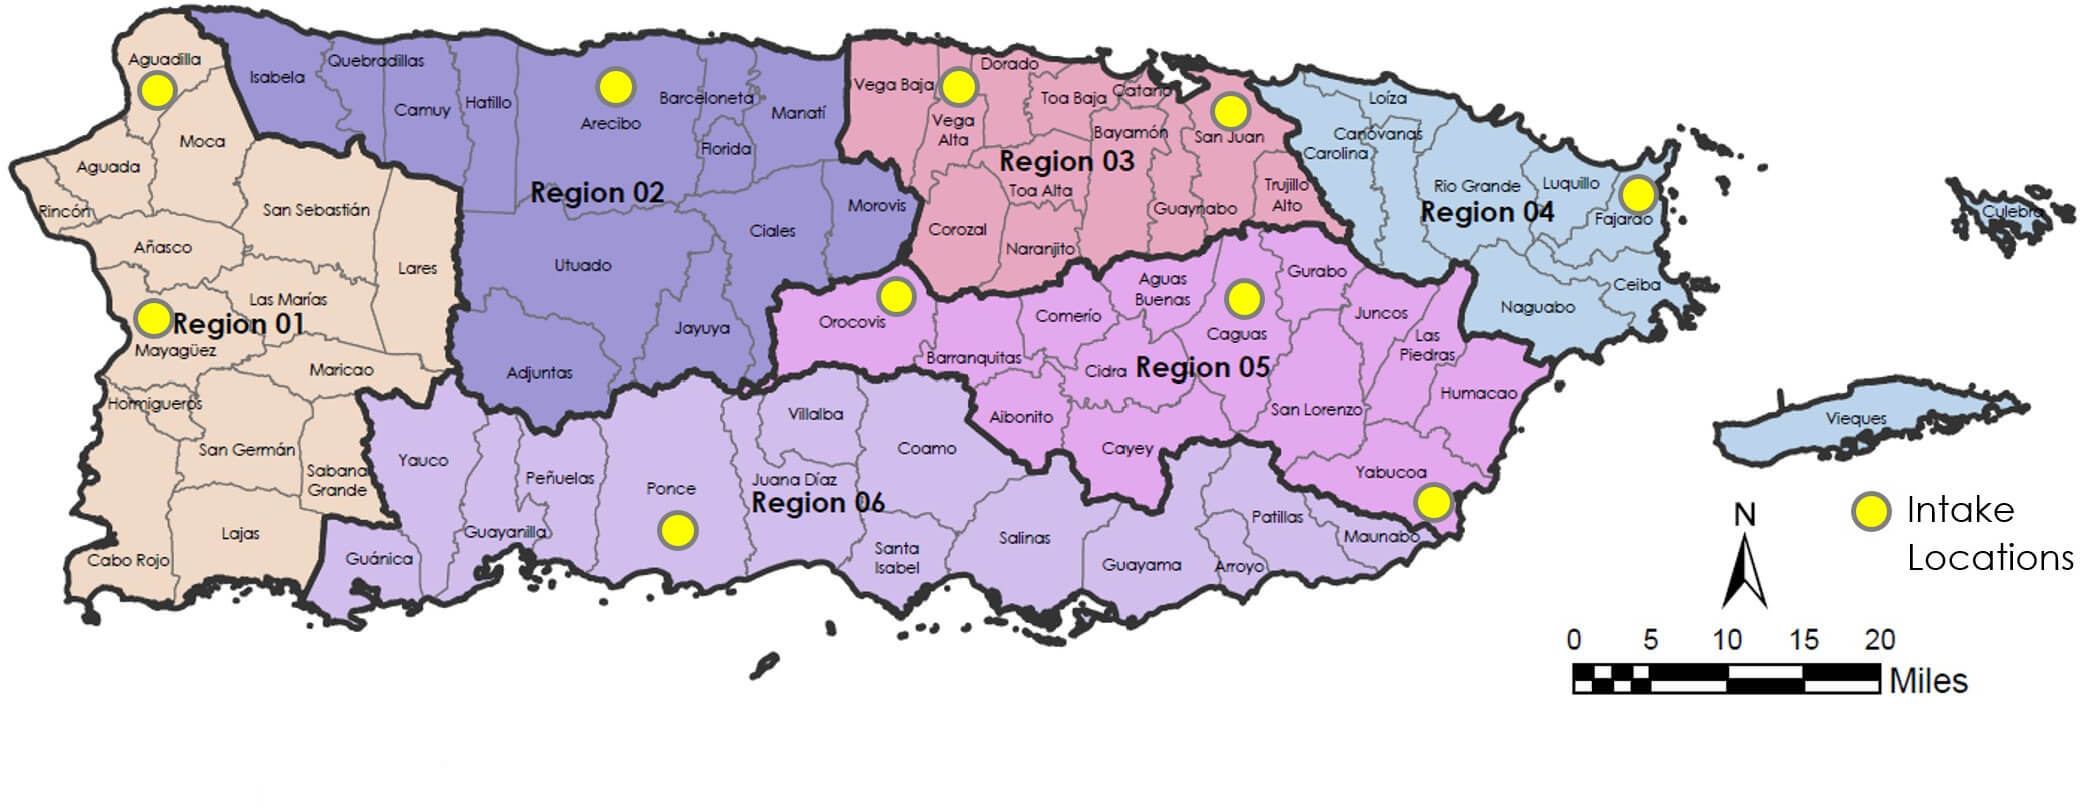 Puerto Rico Map with intake centers by region